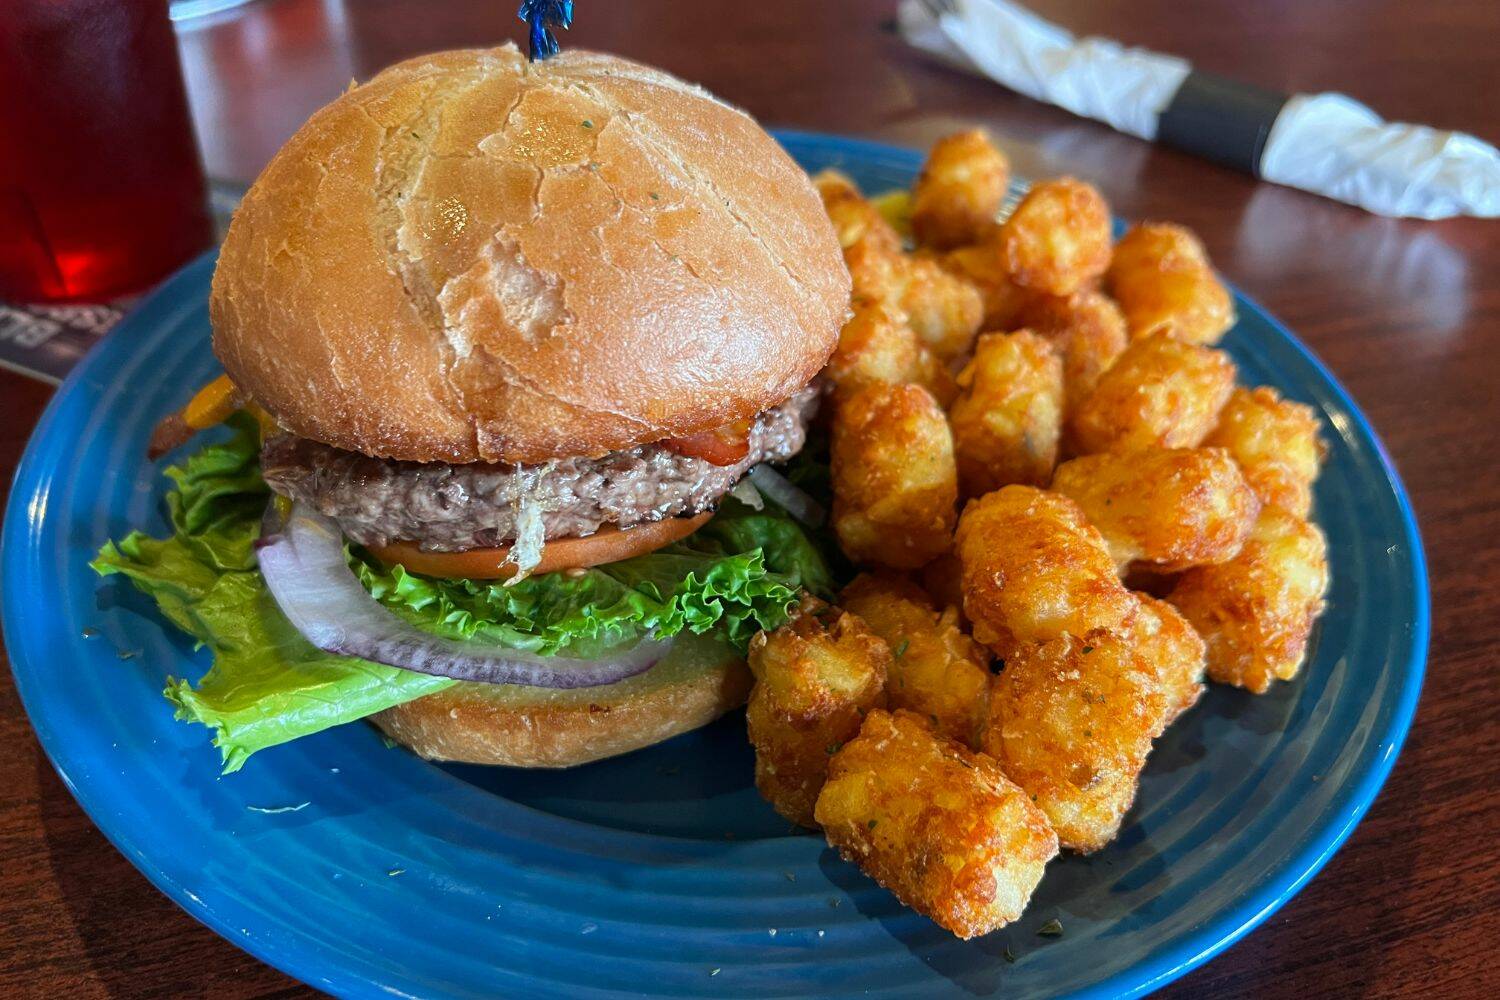 Cameron Sheppard/Sound Publishing
Breakfast Burger from The Local 907 with tater tots.